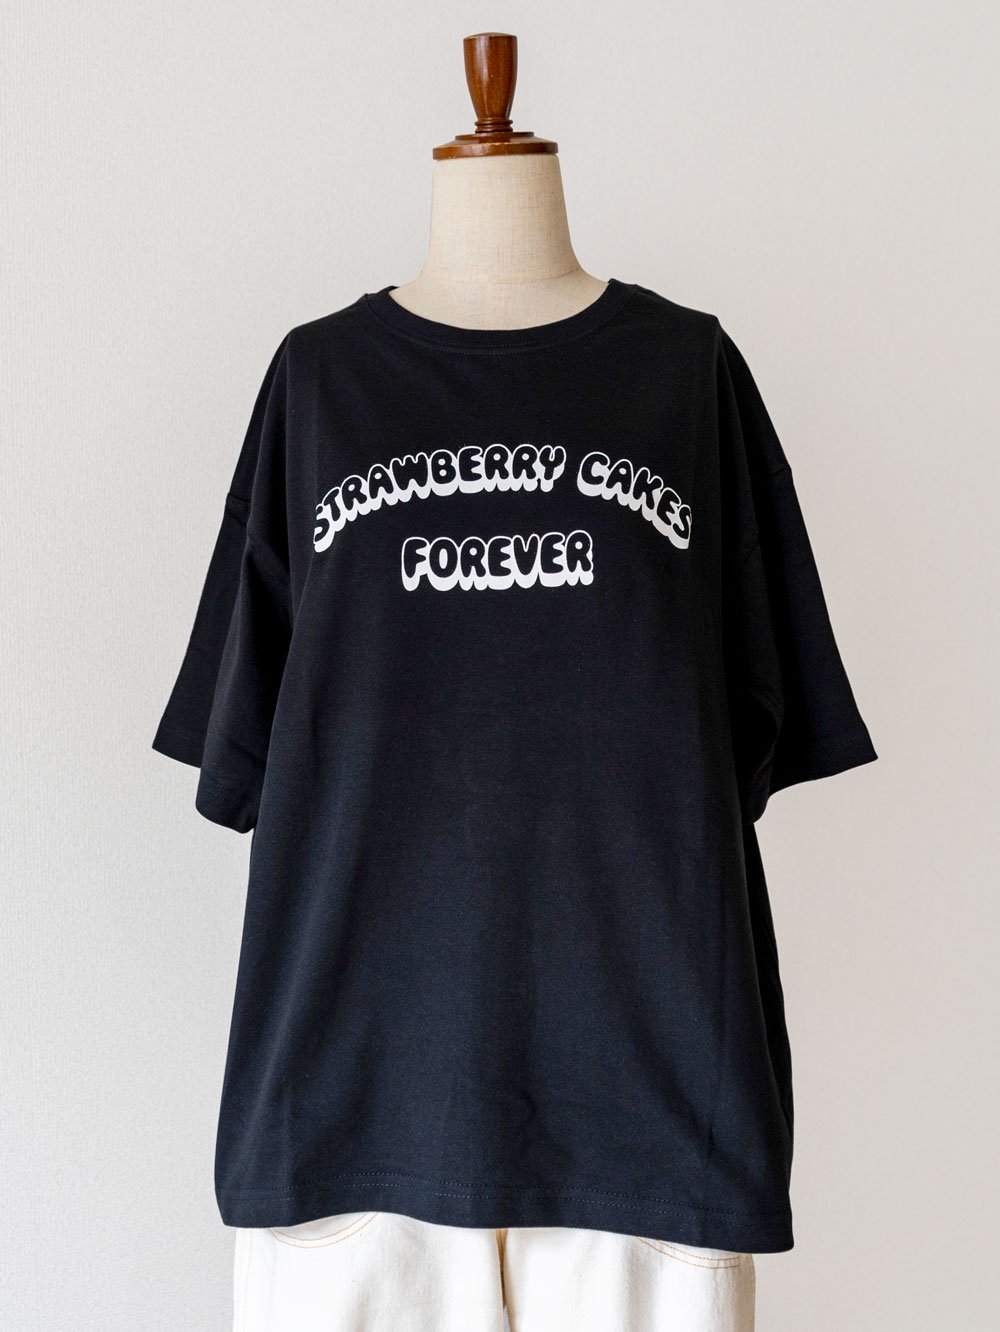 T-Shirt「STRAWBERRY CAKES FOREVER」